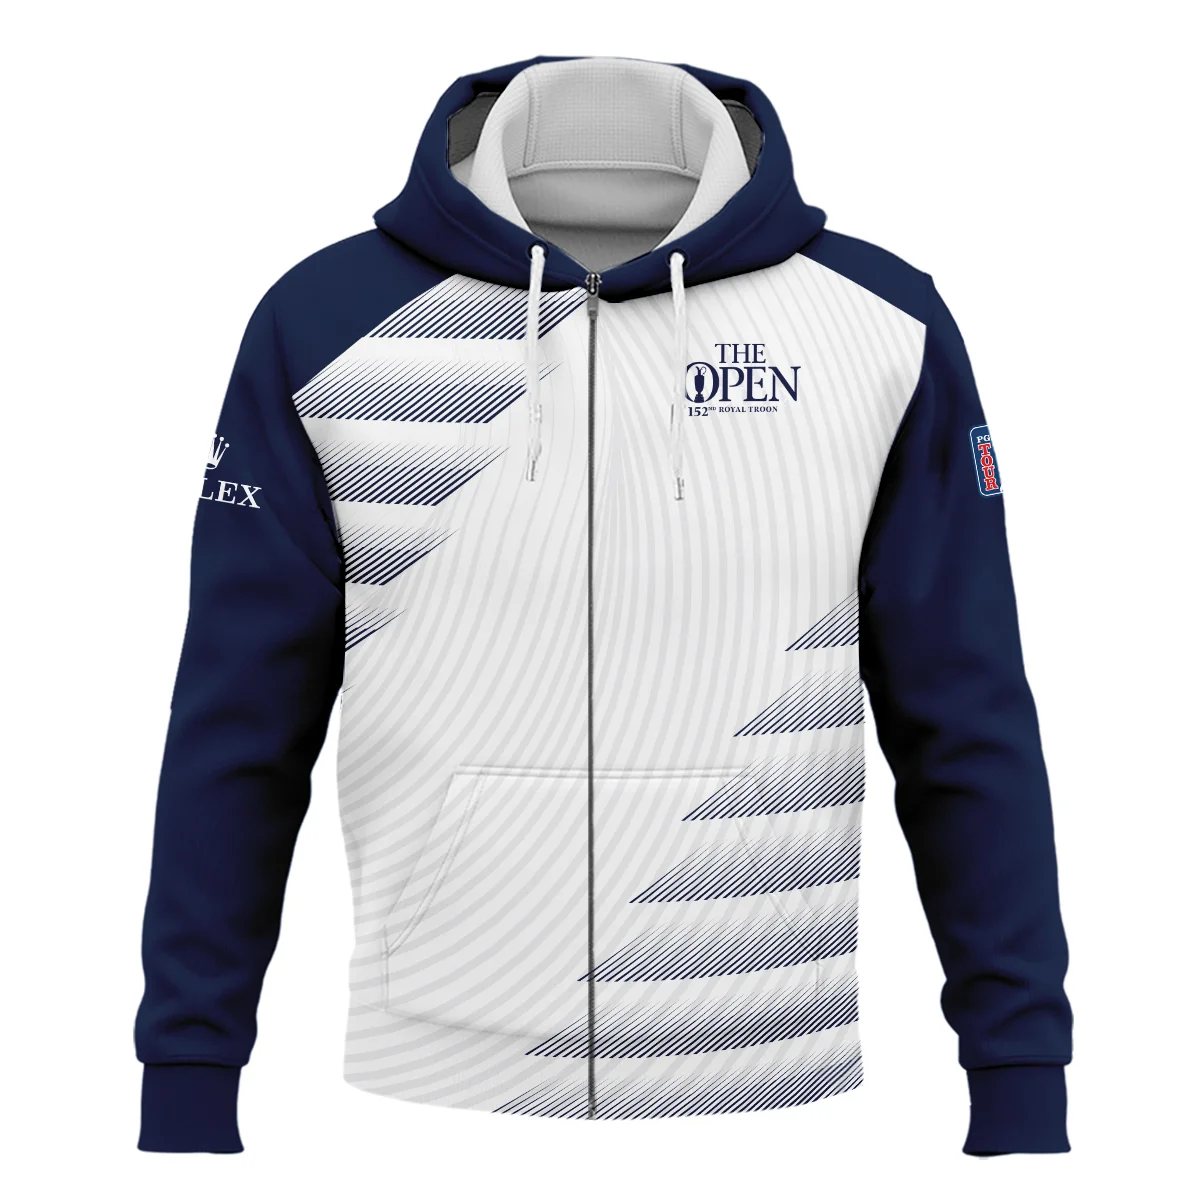 Rolex 152nd Open Championship Blue White Line Pattern Hoodie Shirt All Over Prints HOTOP280624A02ROXHD